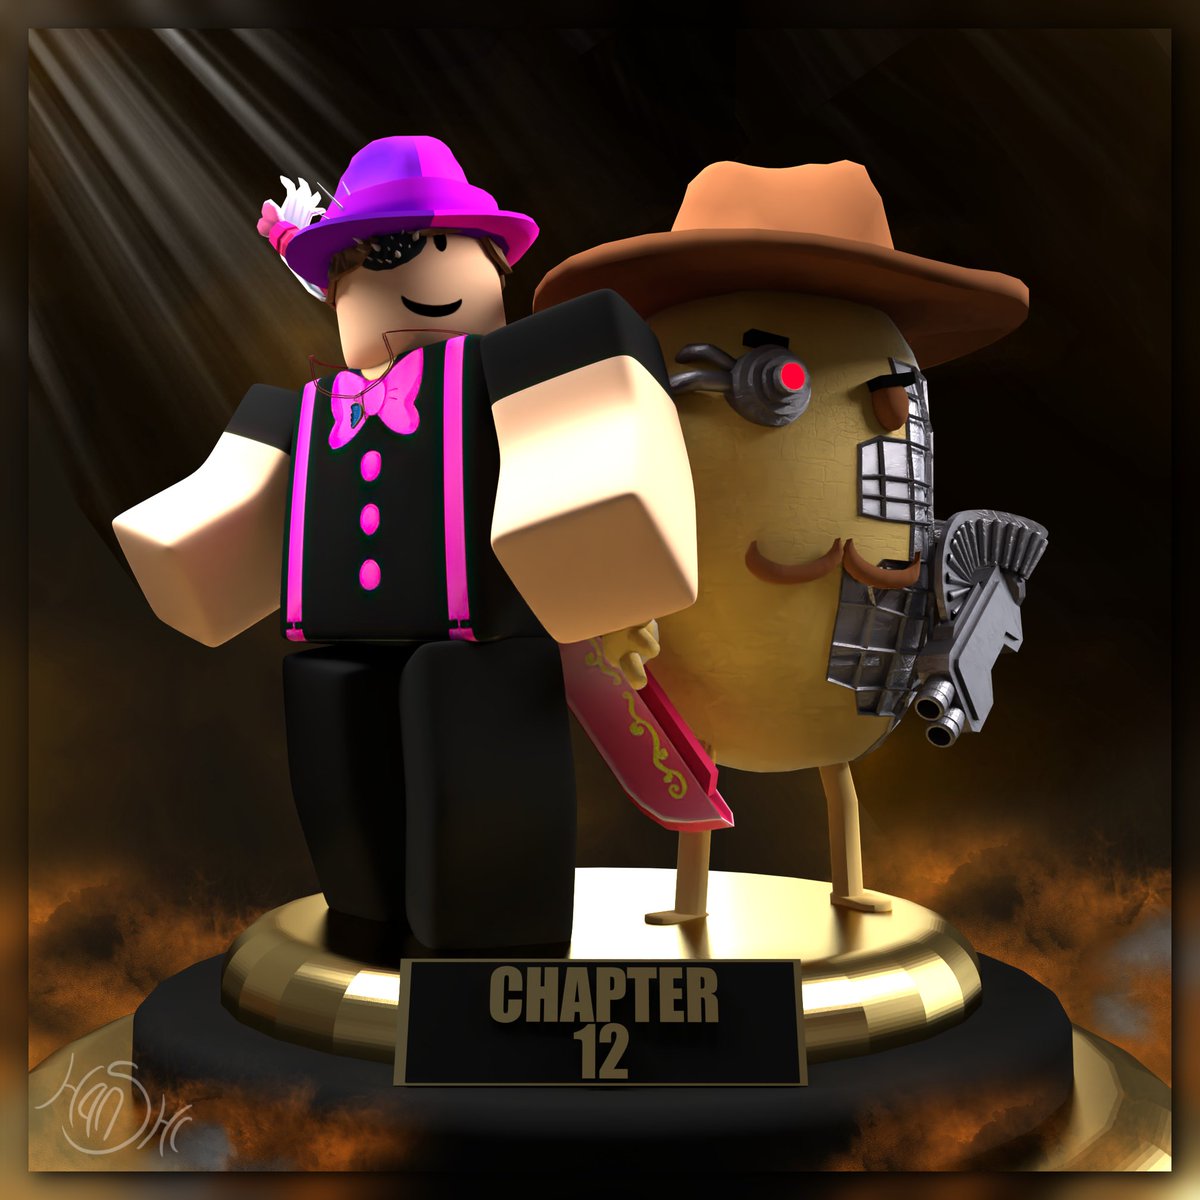 Hans On Twitter For The First Person To Find The True Ending Of Piggy Chapter 12 I Ll Render His Her Character On This Podium Good Luck And Have Fun Roblox Robloxgfx Robloxpiggy Https T Co Wpwtolomdd - first person roblox